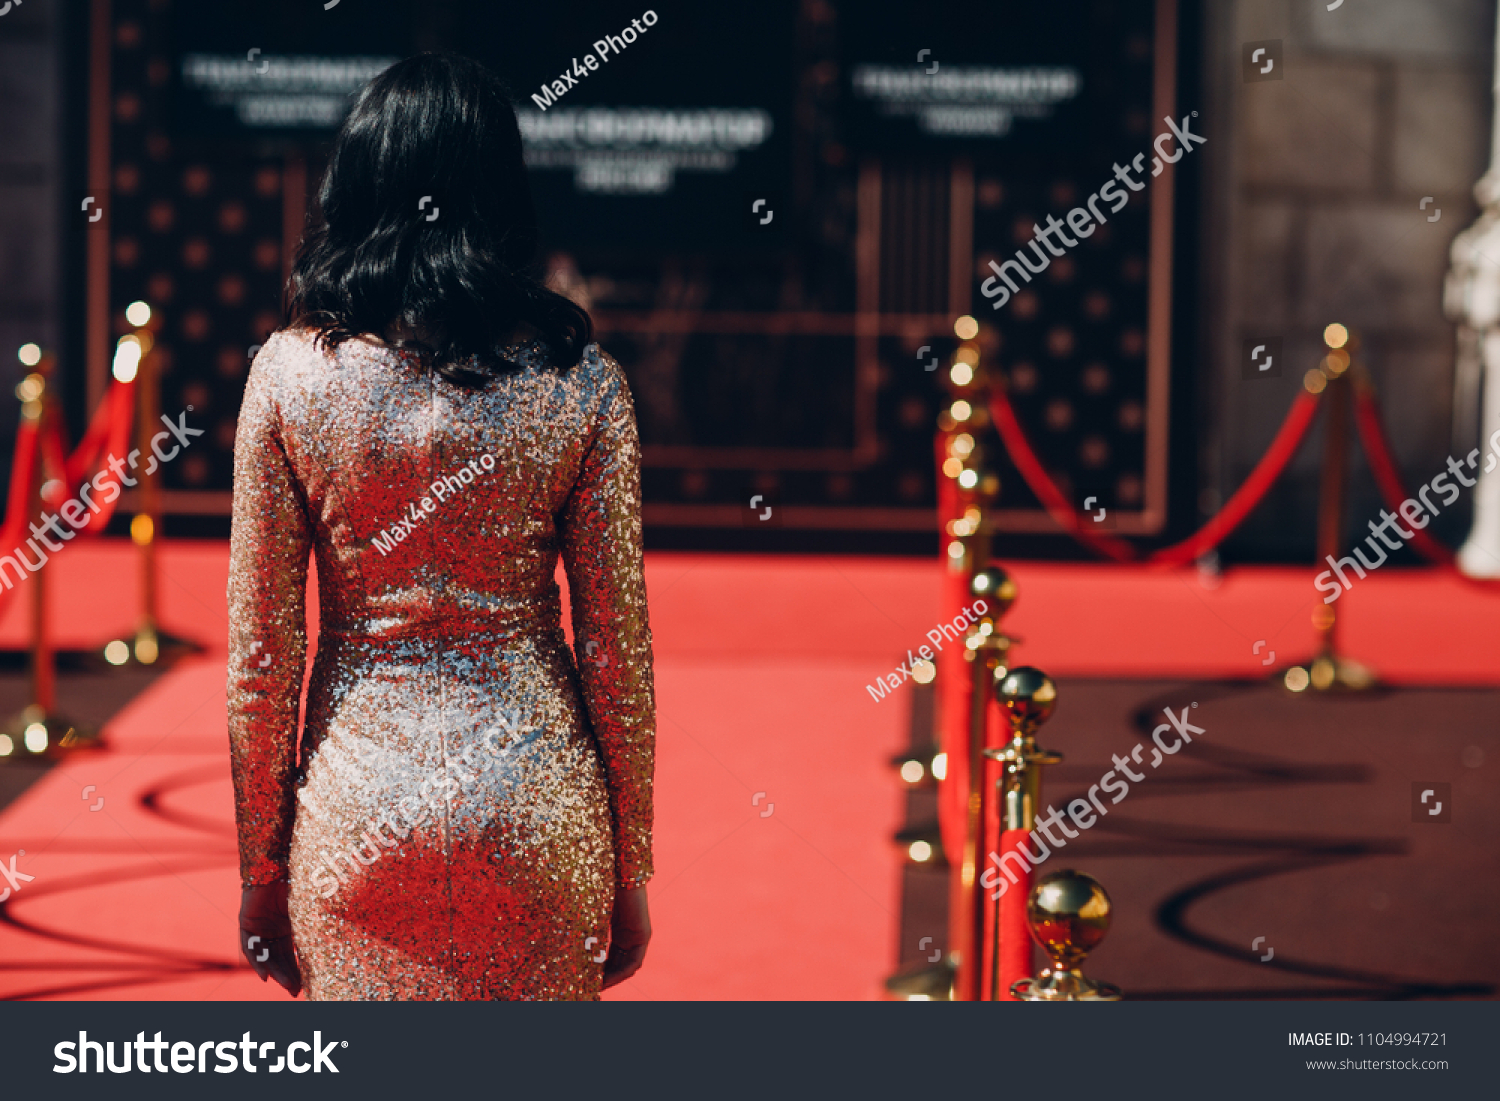 Woman in a luxurious dress on a red carpet #1104994721